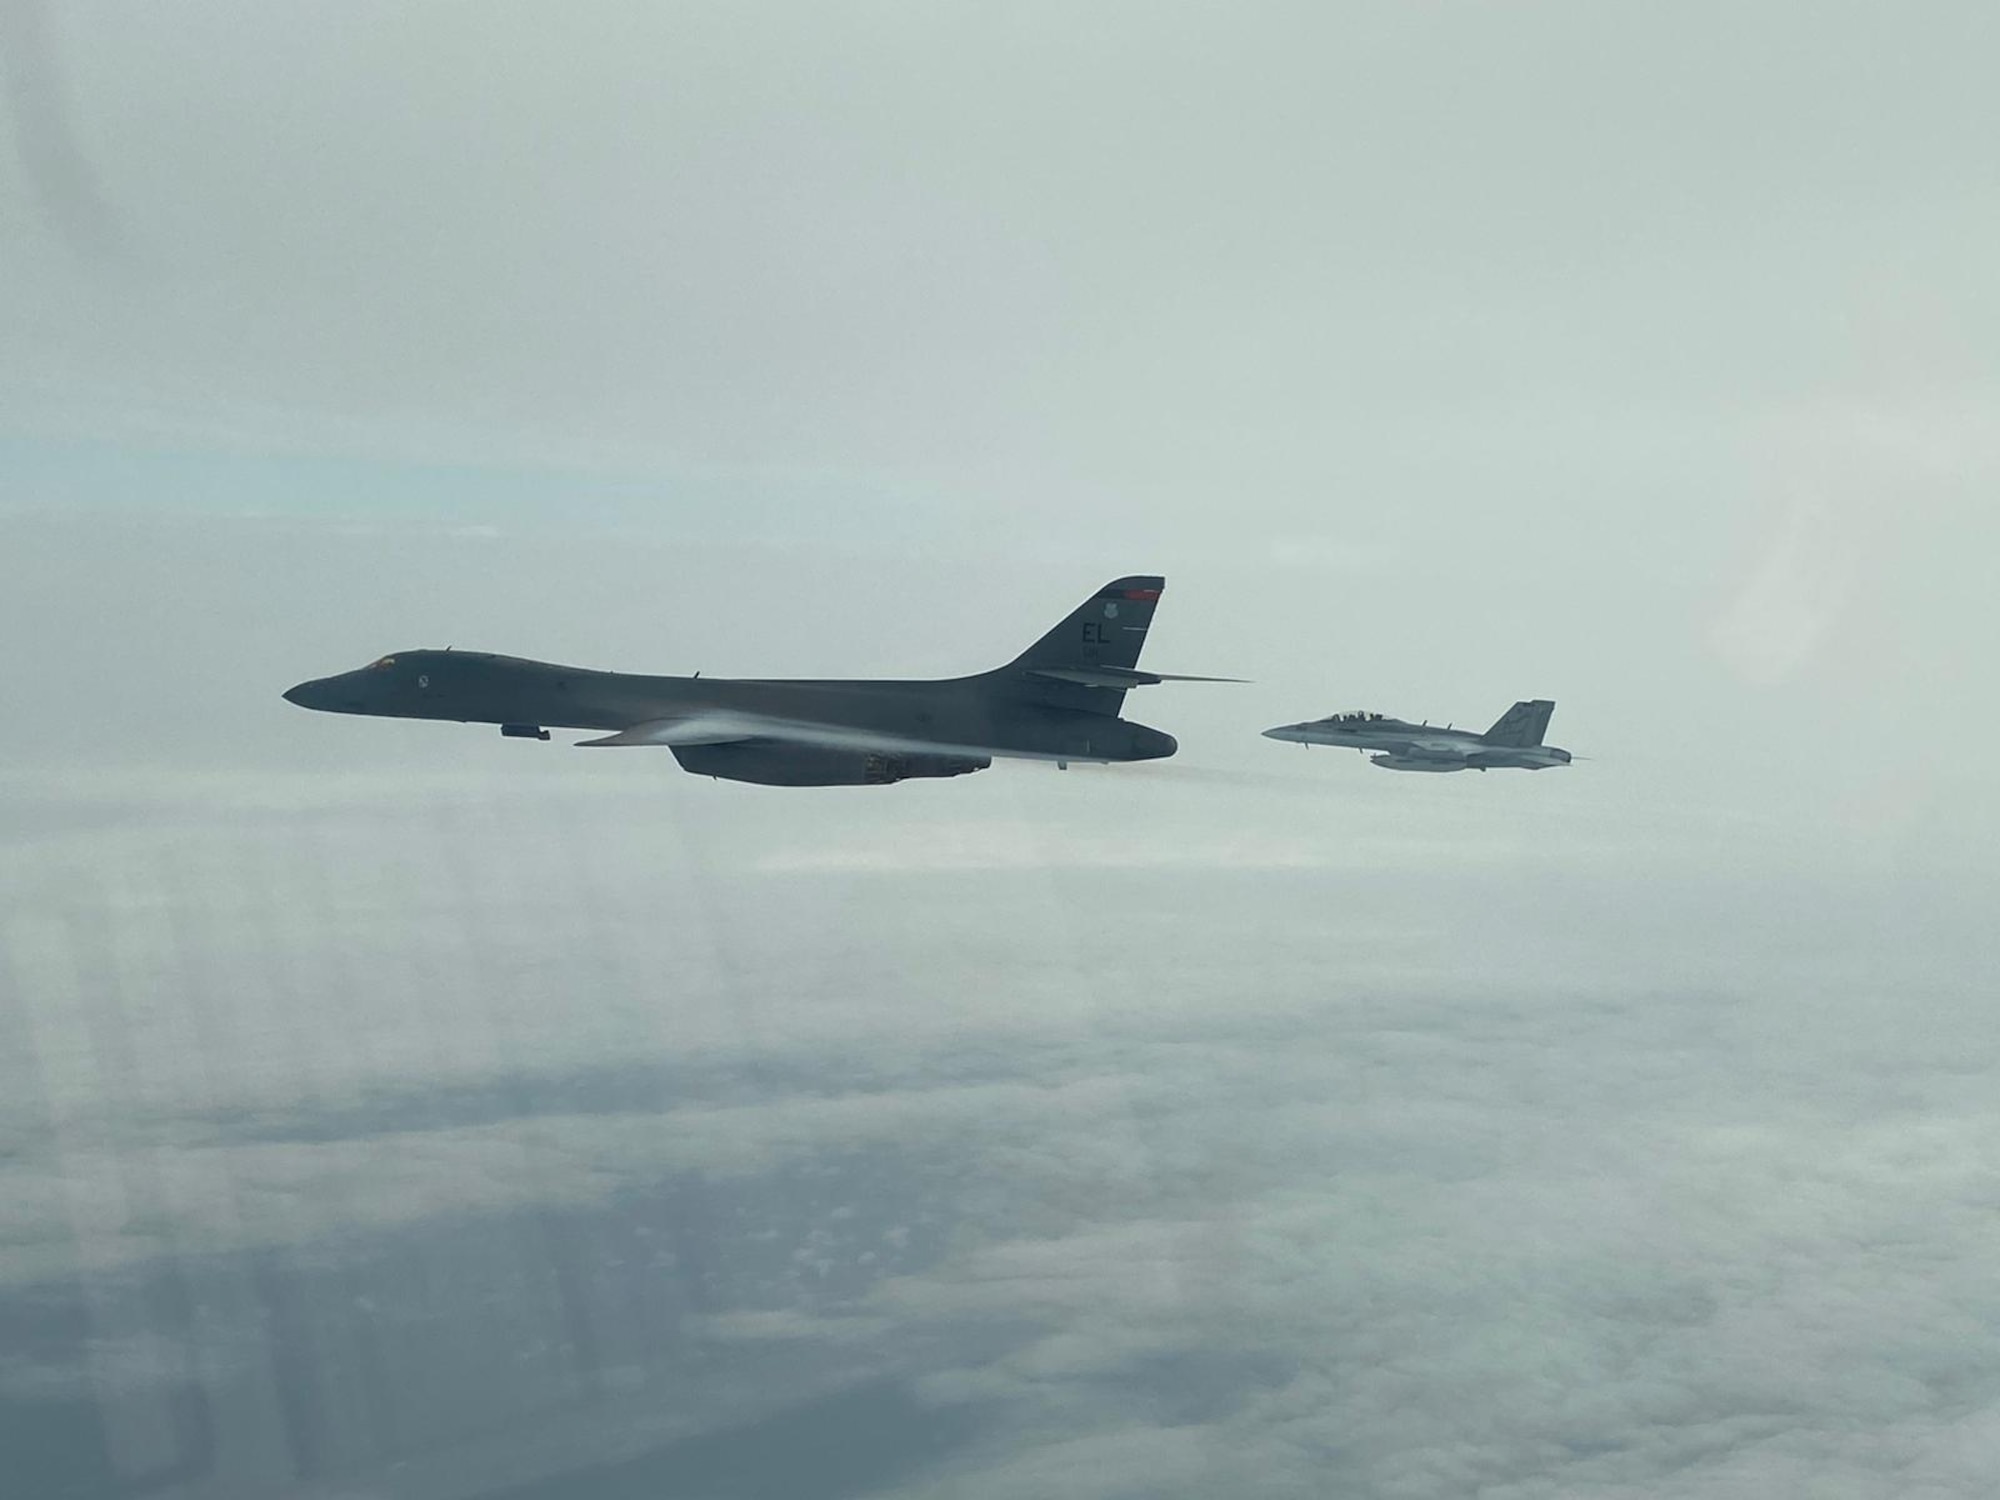 A B-1B Lancer from the 34th Expeditionary Bomb Squadron, Ellsworth Air Force Base, S.D., conducts integration training with a Koku-Jieitai, or Japanese Air Self-Defense Force (JASDF), F-15J in the Sea of Japan, Sept. 30, 2020. The B-1s integrated with Koku-Jietai to enhance bilateral interoperability and mutual readiness between the U.S. and Japan. (Courtesy photo)